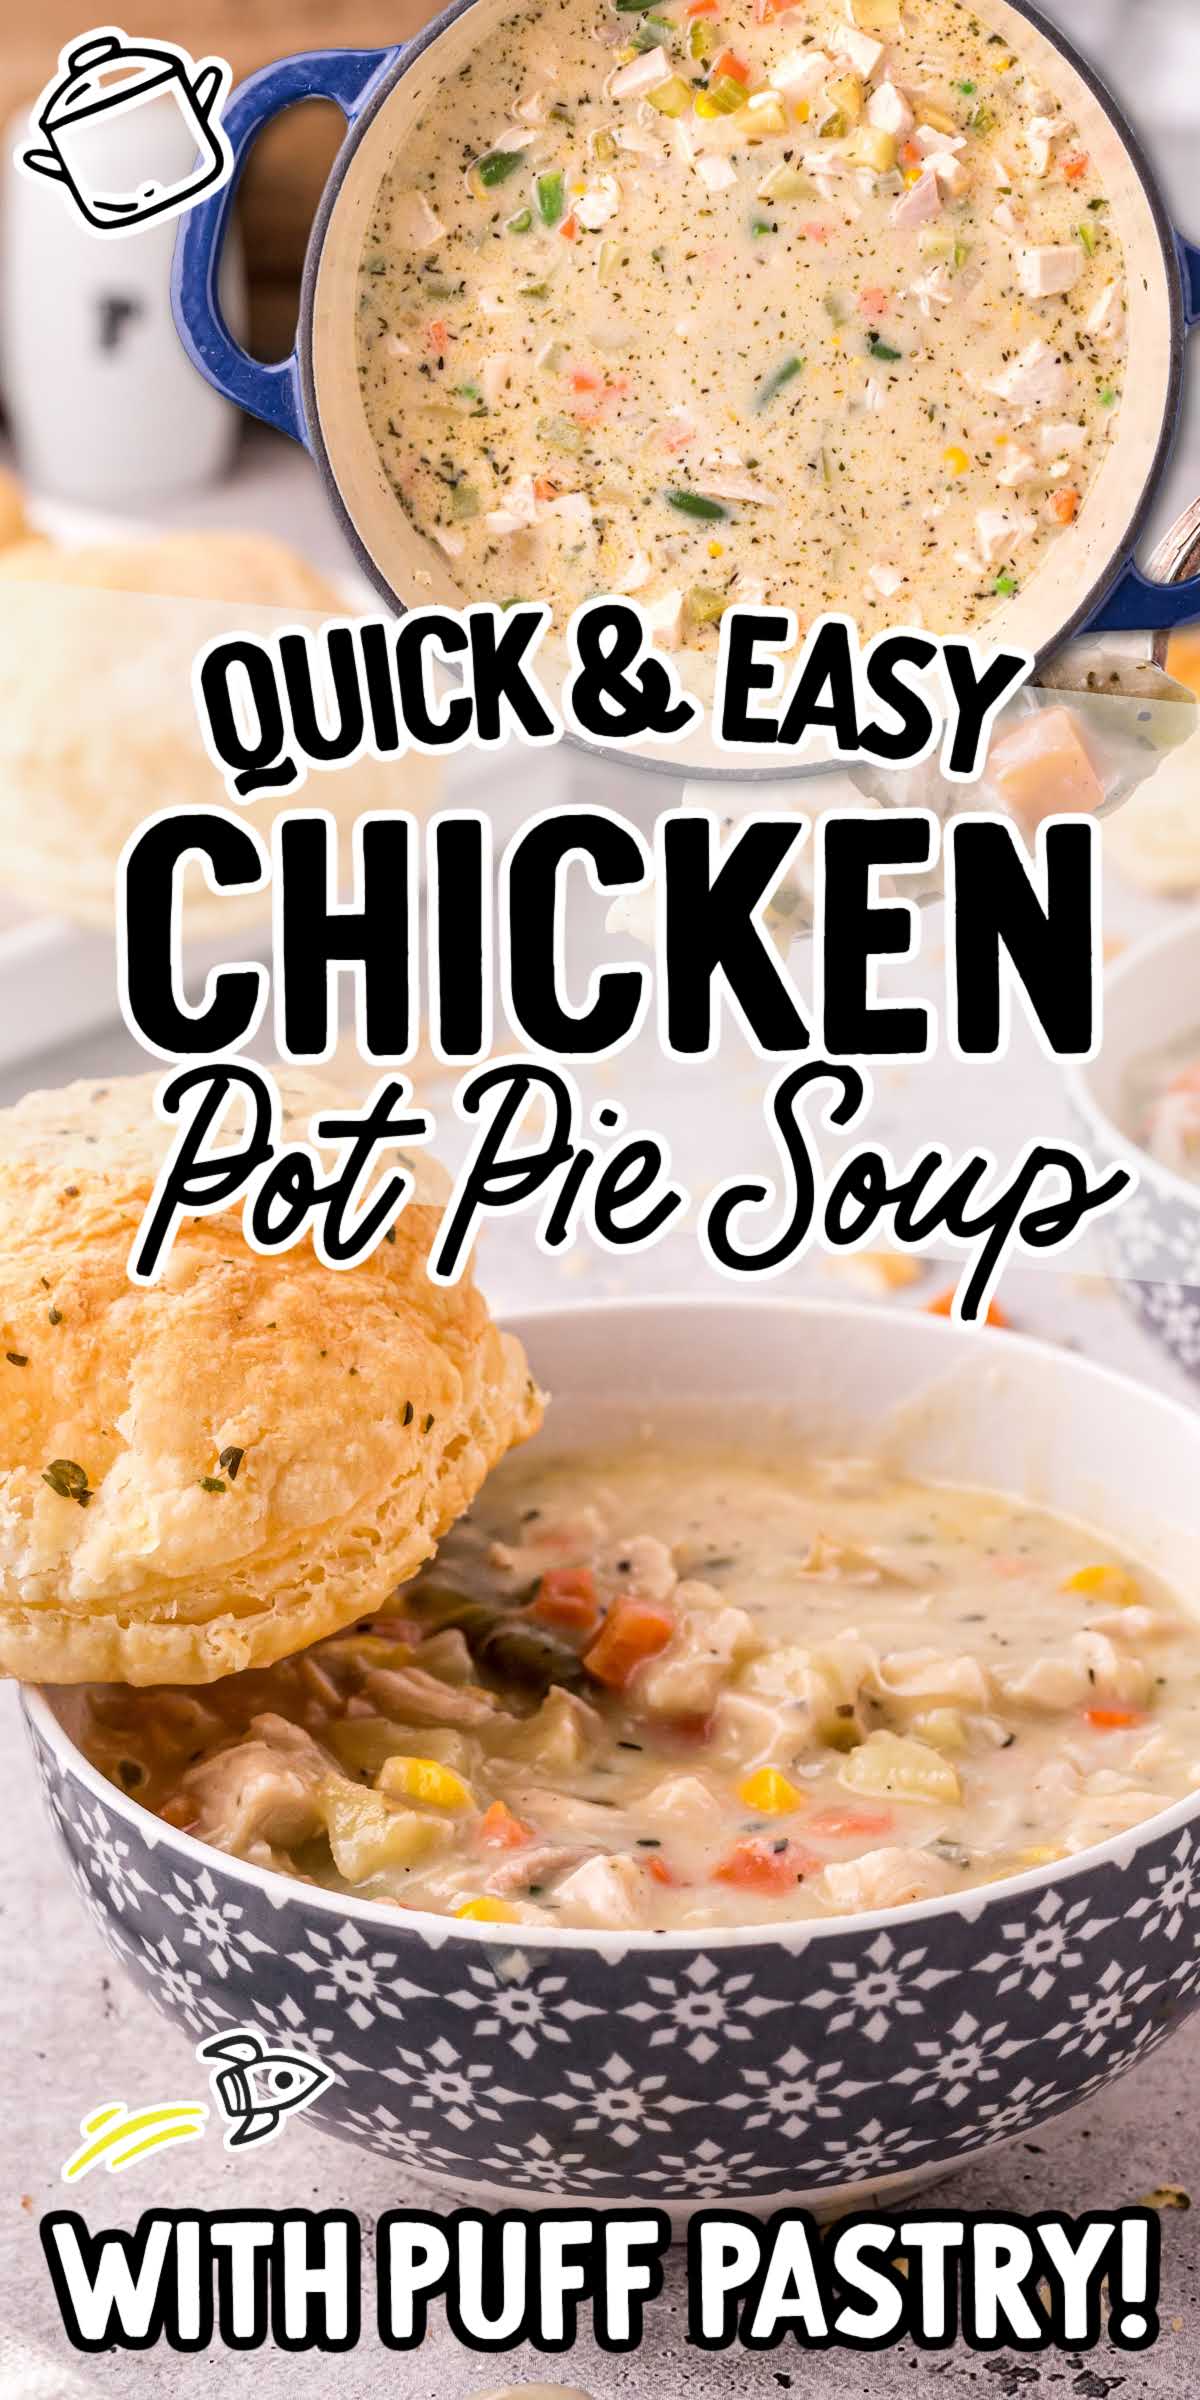 Chicken Pot Pie Soup - Spaceships and Laser Beams